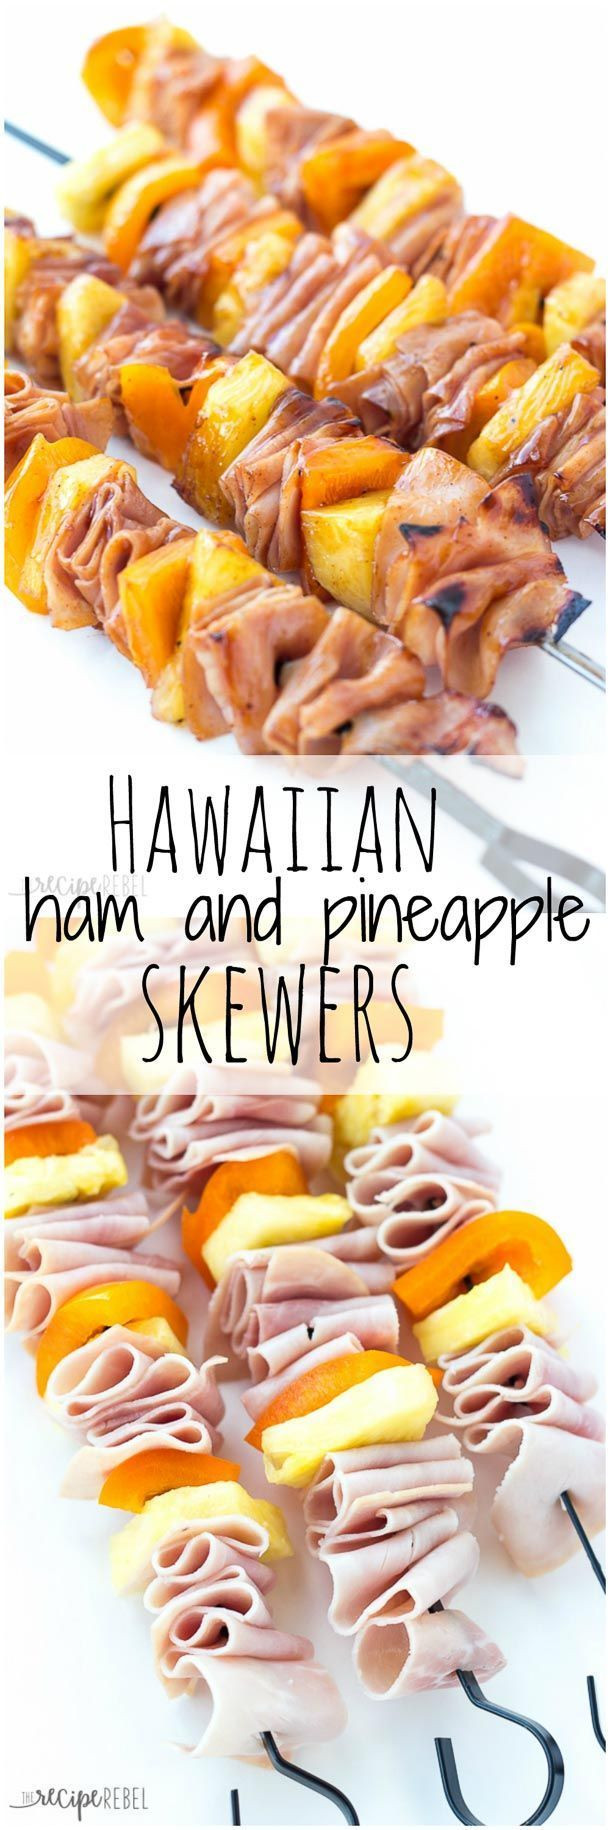 Easy Hawaiian Desserts And Appetizers
 Hawaiian Ham and Pineapple Skewers A super simple 4